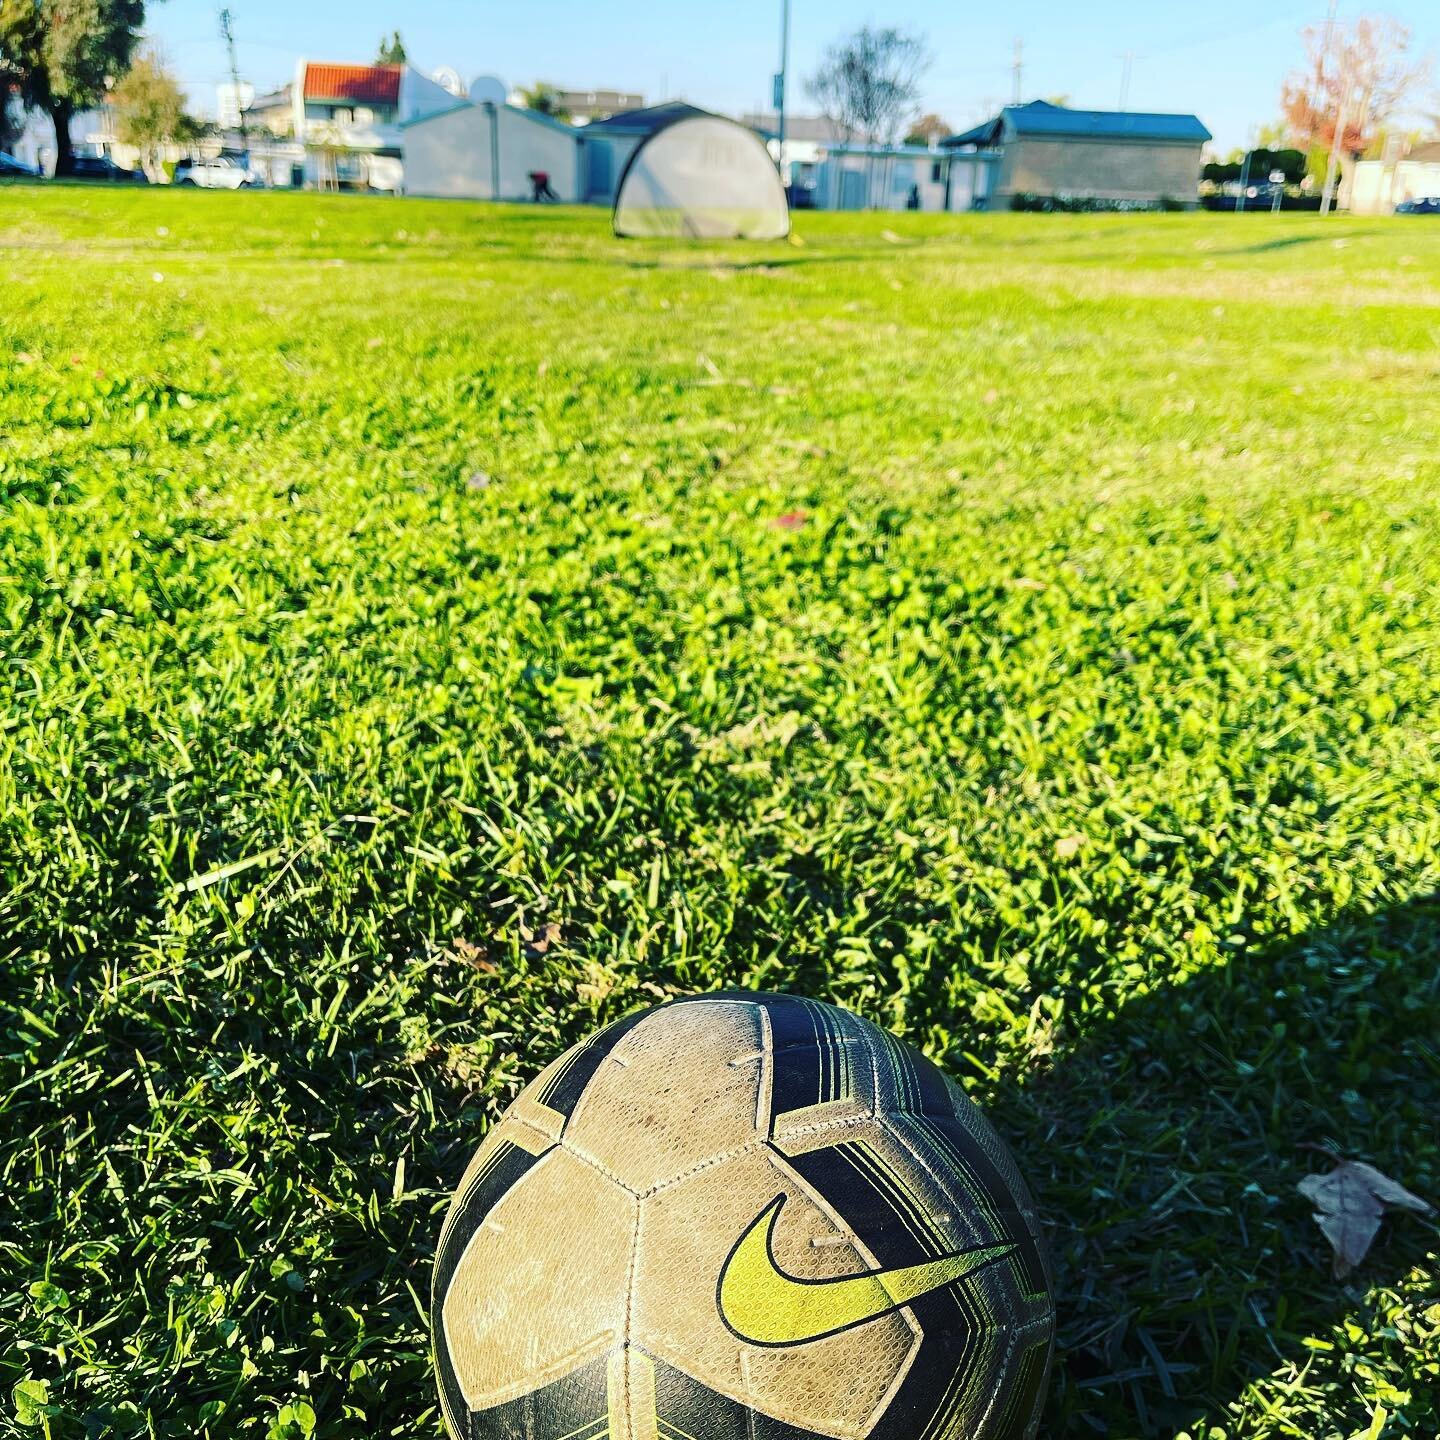 That old AYSO feeling of wet cut grass for Saturday morning session. #soccer #soccerskills #soccermoves #soccerpractice #soccertraining #soccerplayer #soccerislife #soccerlife #soccerstars #soccertime #soccergame #soccerfan #soccerlove #soccercoach #